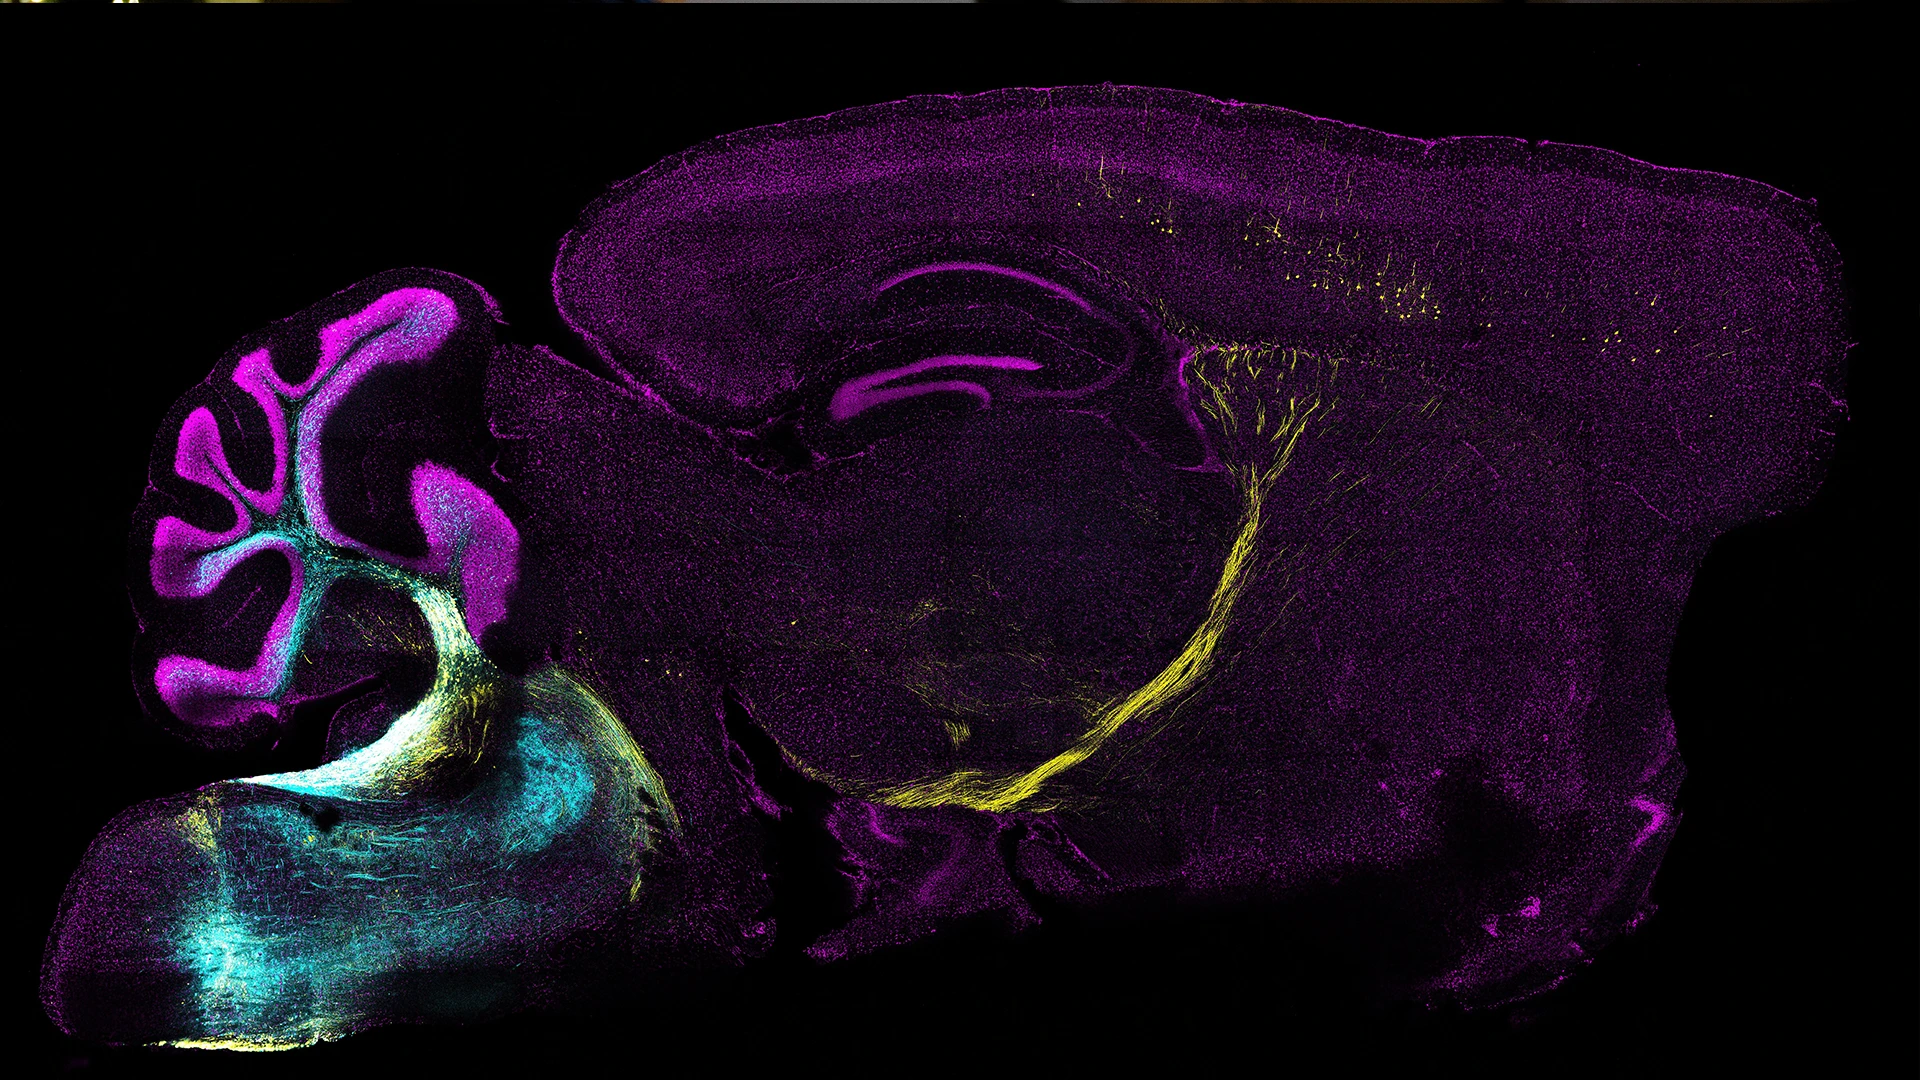 Axonal projections from the inferior olivary nucleus to the lateral septum circuit, which promotes escape behavior. Image Credit: Long Li, PhD, Postdoctoral Fellow and Instructor in the Scott Russo, PhD, Lab, Nash Family Department of Neuroscience.